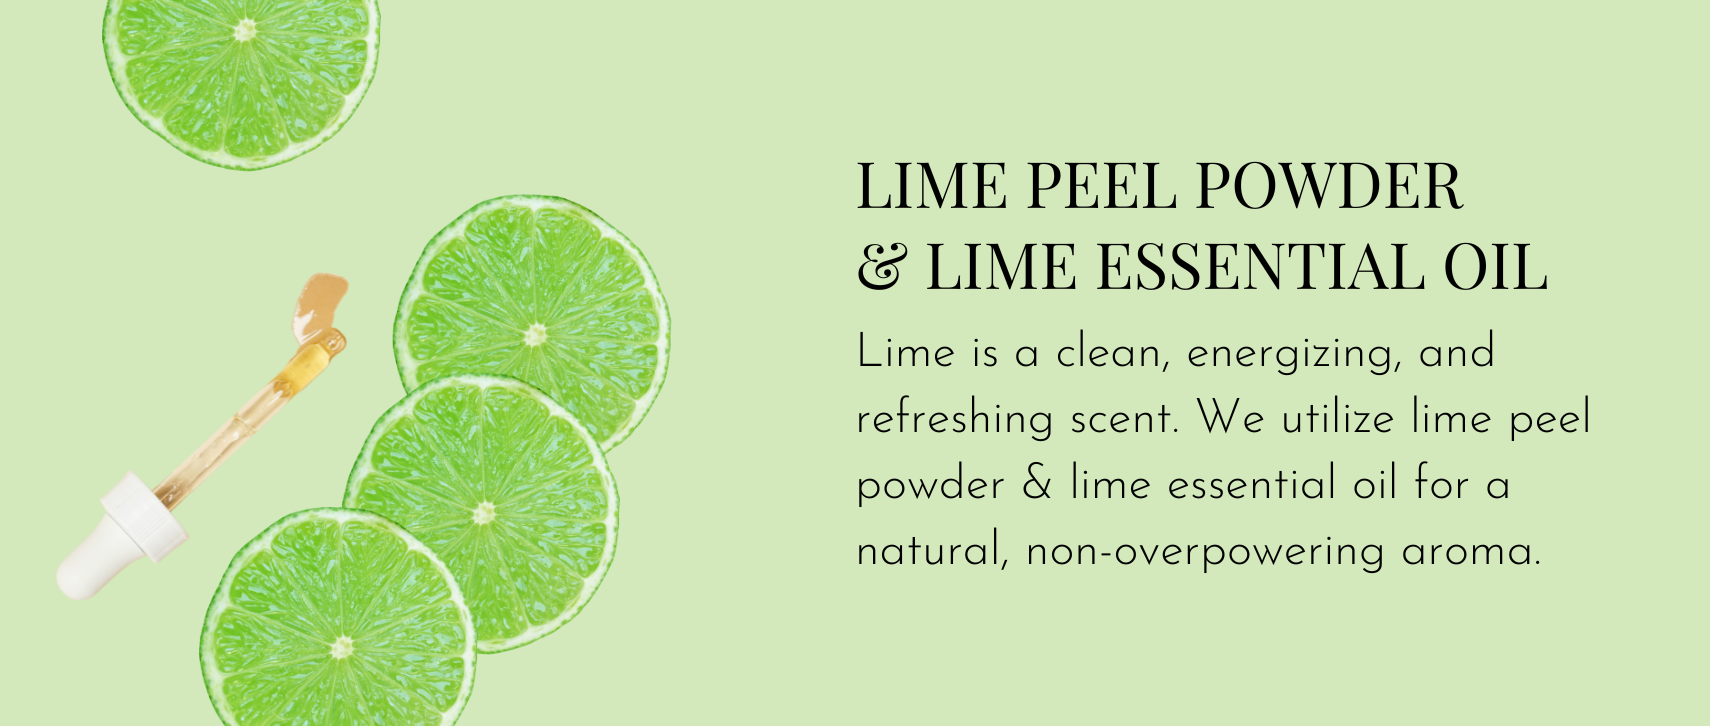 Lime Peel Powder & Lime Essential Oil – Lime is a clean, energizing, and refreshing scent. We utilize lime peel powder & lime essential oil for a natural, non-overpowering aroma.